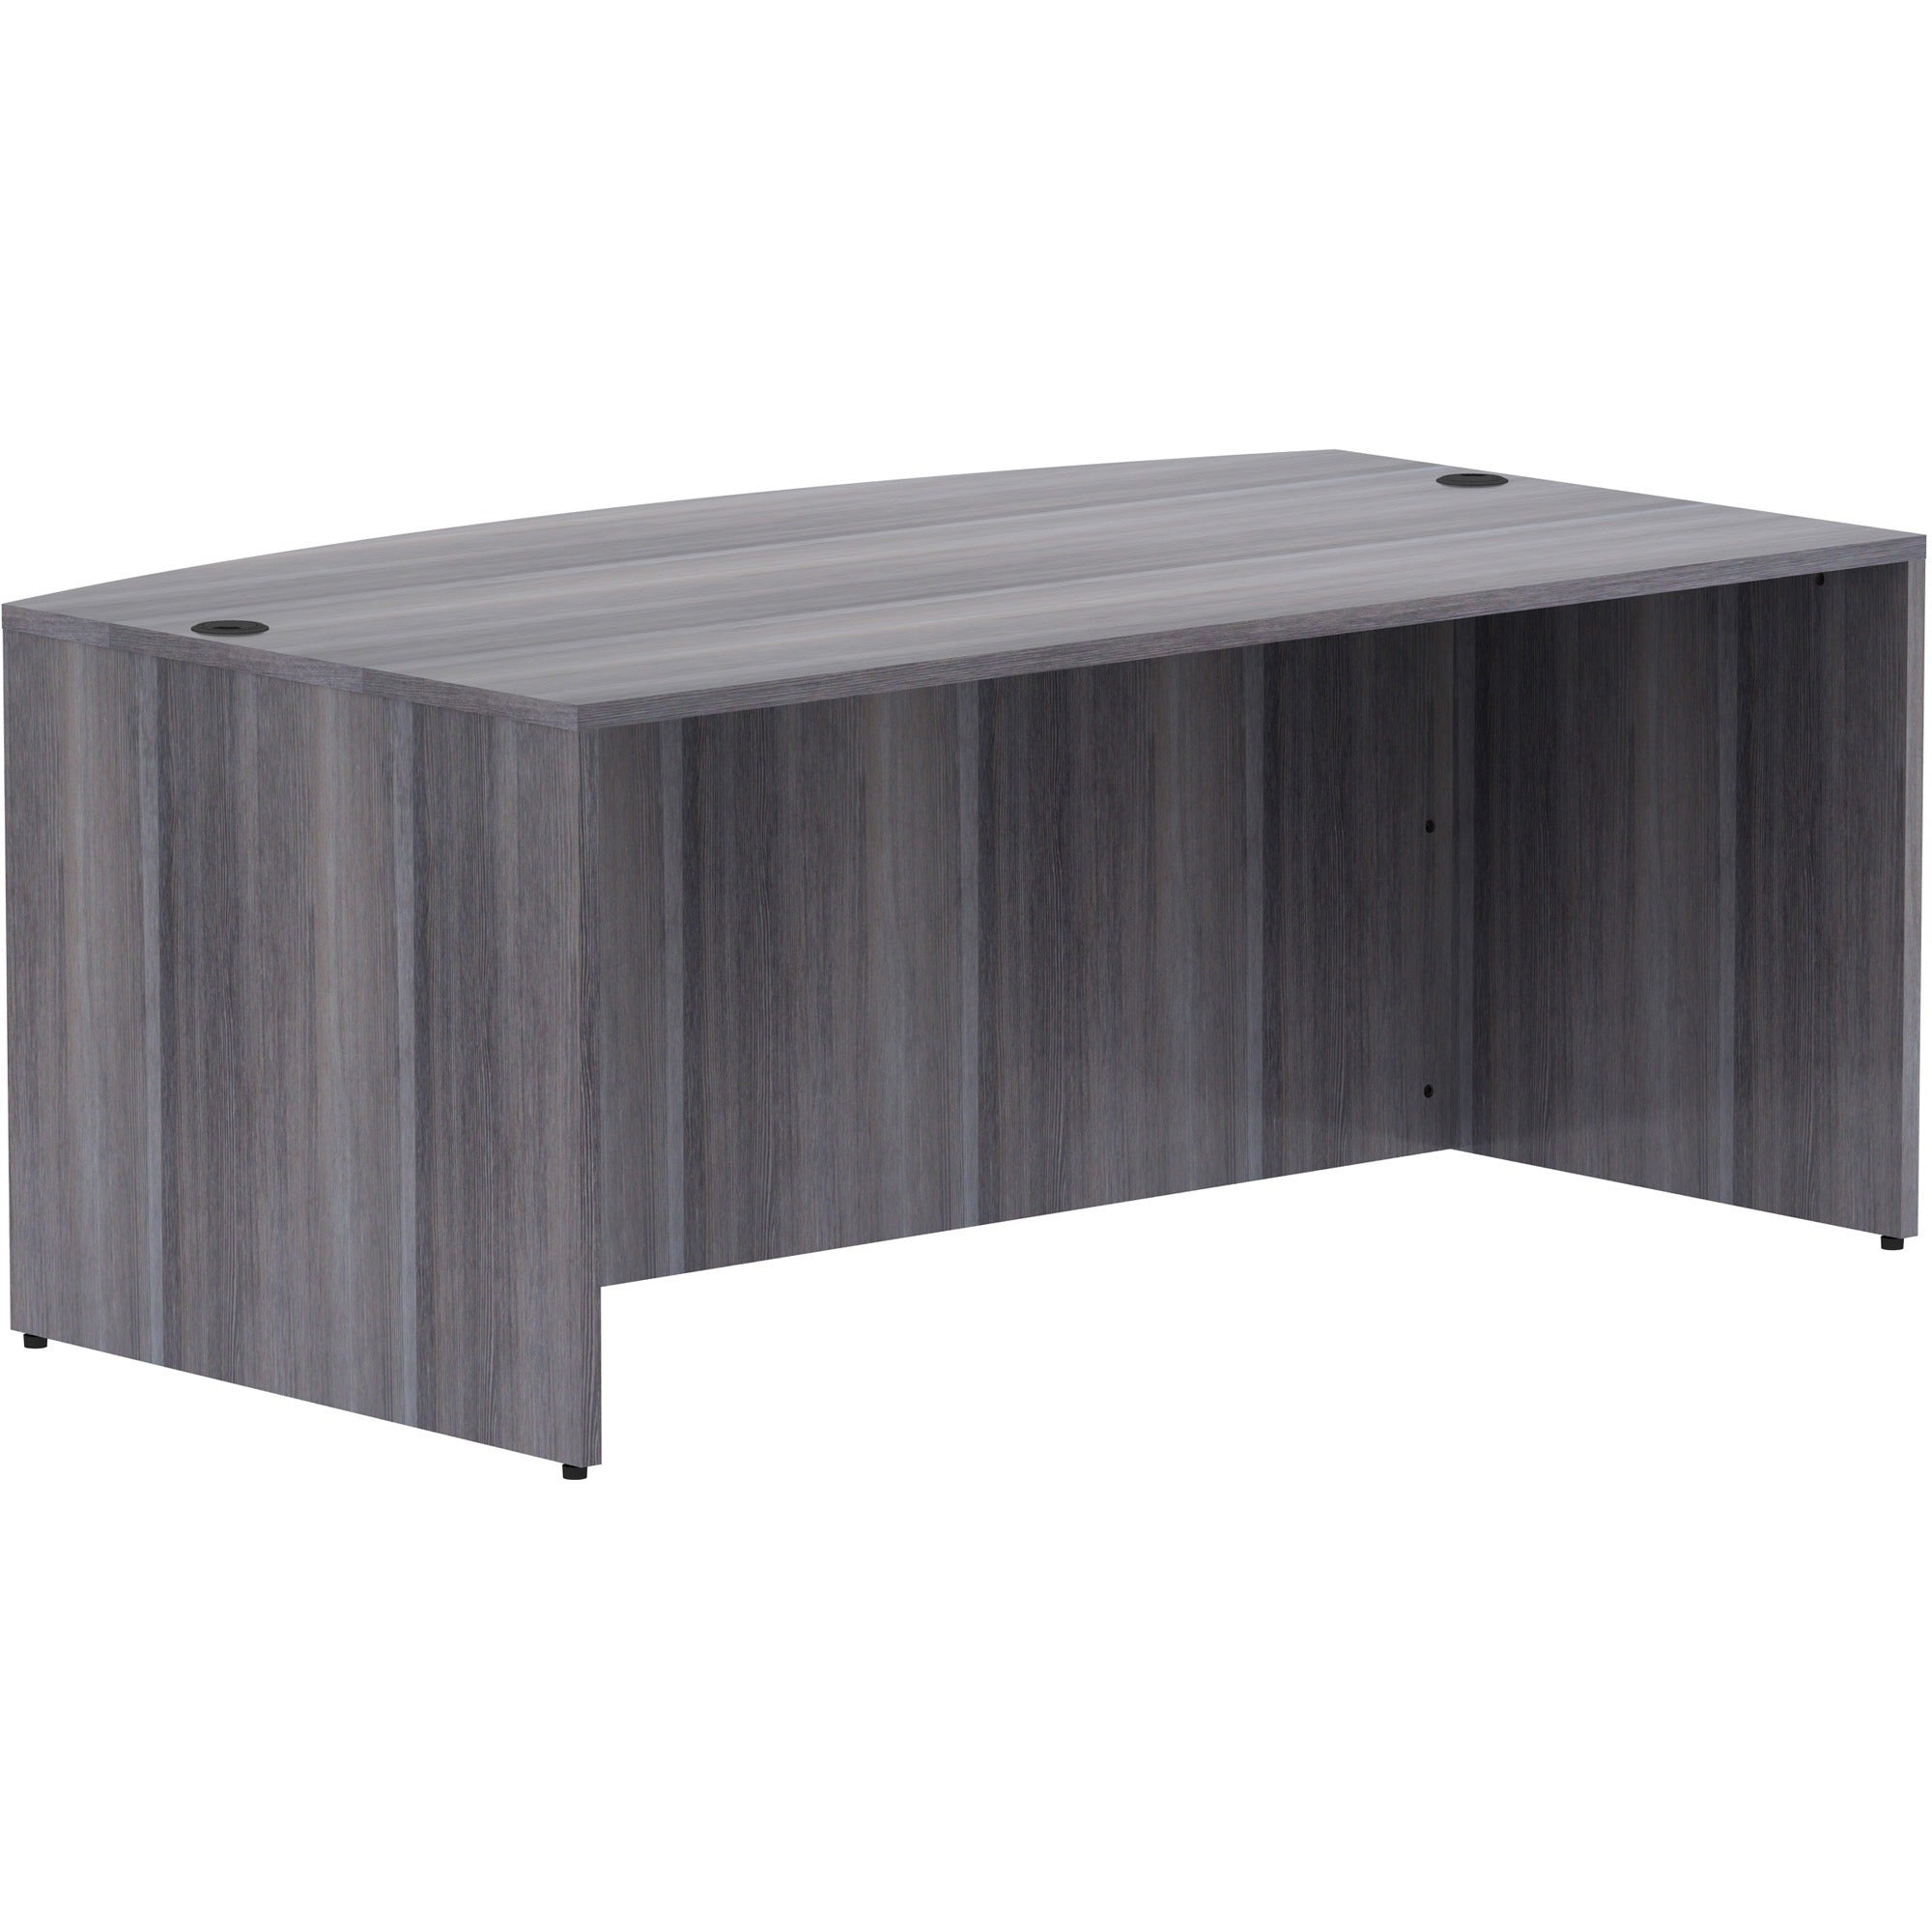 lorell-essentials-series-bowfront-desk-shell-72-x-414295-desk-shell-1-top-bow-front-edge-finish-weathered-charcoal-laminate_llr69591 - 1